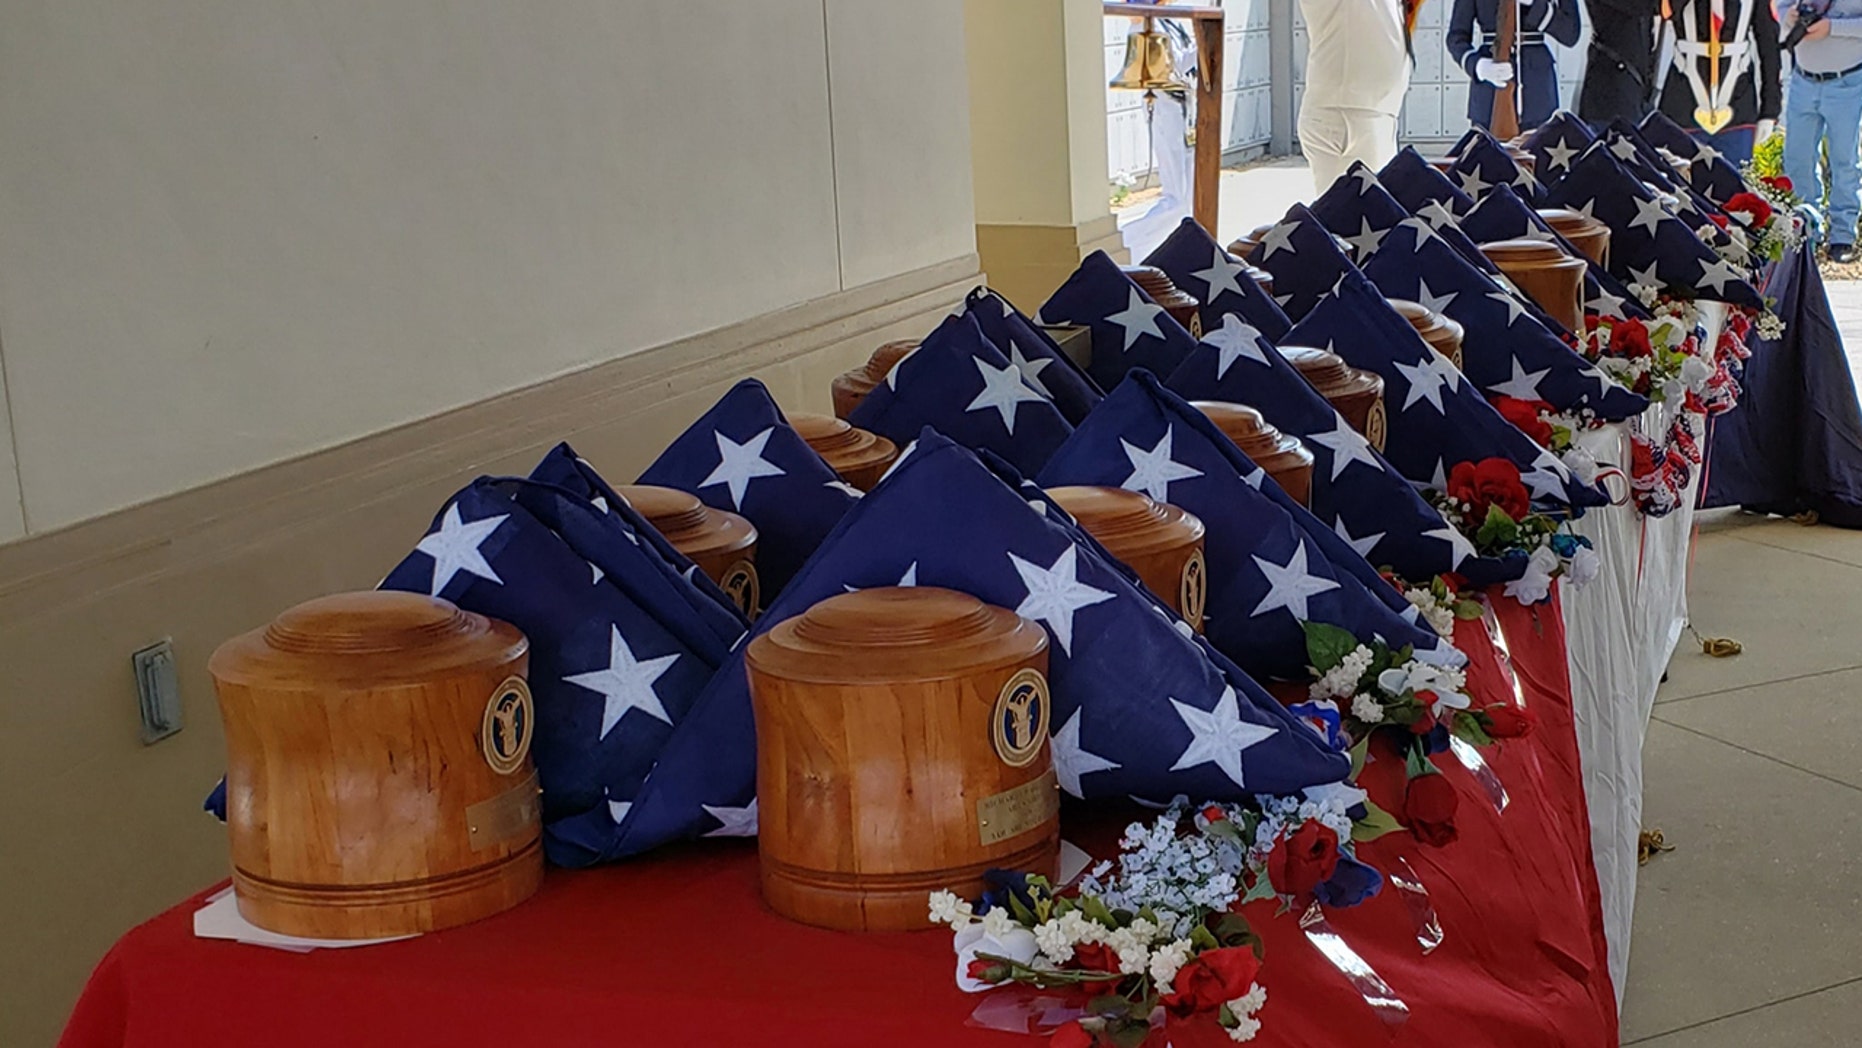 A table holds wood urns containing the cremated remains of 25 American veterans who were buried Saturday at South Florida National Cemetery in a special ceremony.